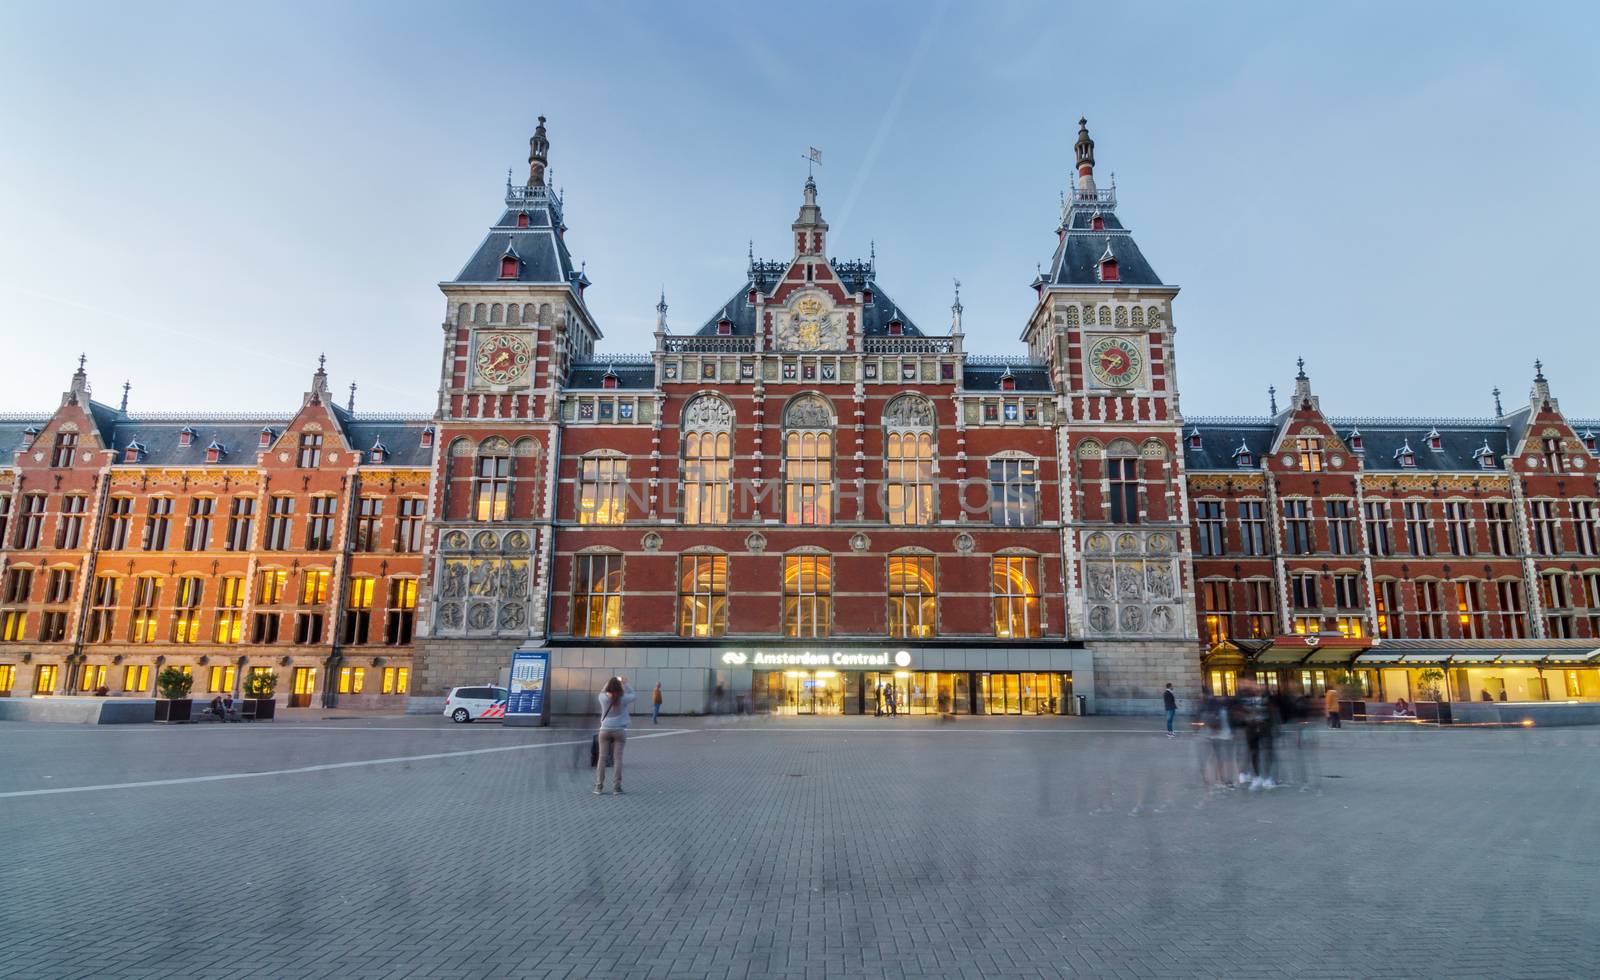 Amsterdam, Netherlands - May 8, 2015: People at Amsterdam Central Train Station on May 8, 2015 in Amsterdam, Netherlands. Amsterdam Central Station is used by 250,000 passengers a day.